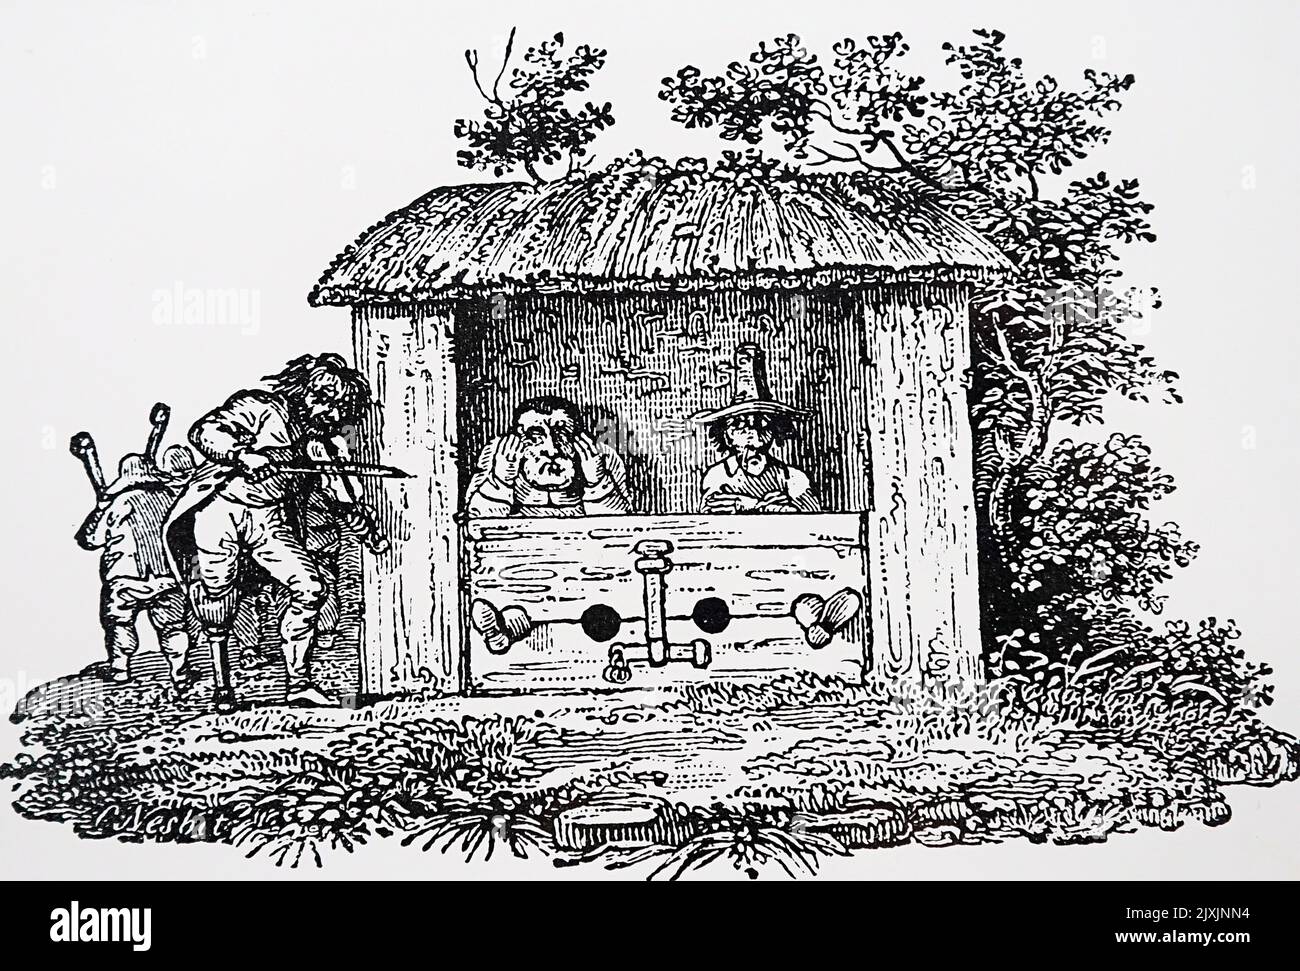 Engraving depicting Hudibras and Ralpho in stocks being serenaded by the fiddler with a wooden leg. Engraved by Charlton Nesbitt (1755-1838). Dated 19th Century Stock Photo